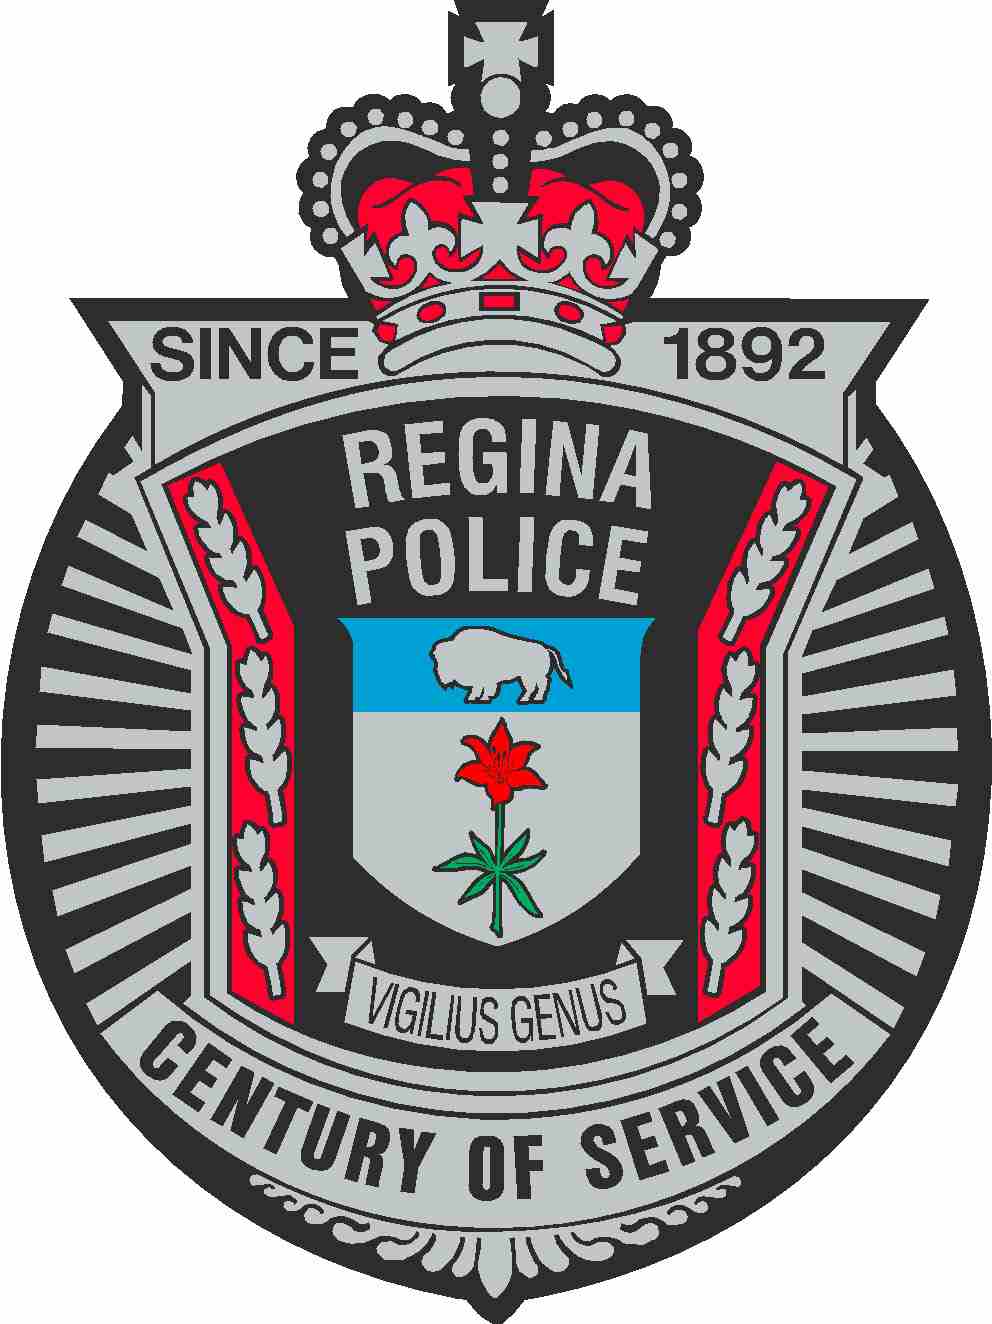 Stab wounds to the head send two people to Regina hospital - image